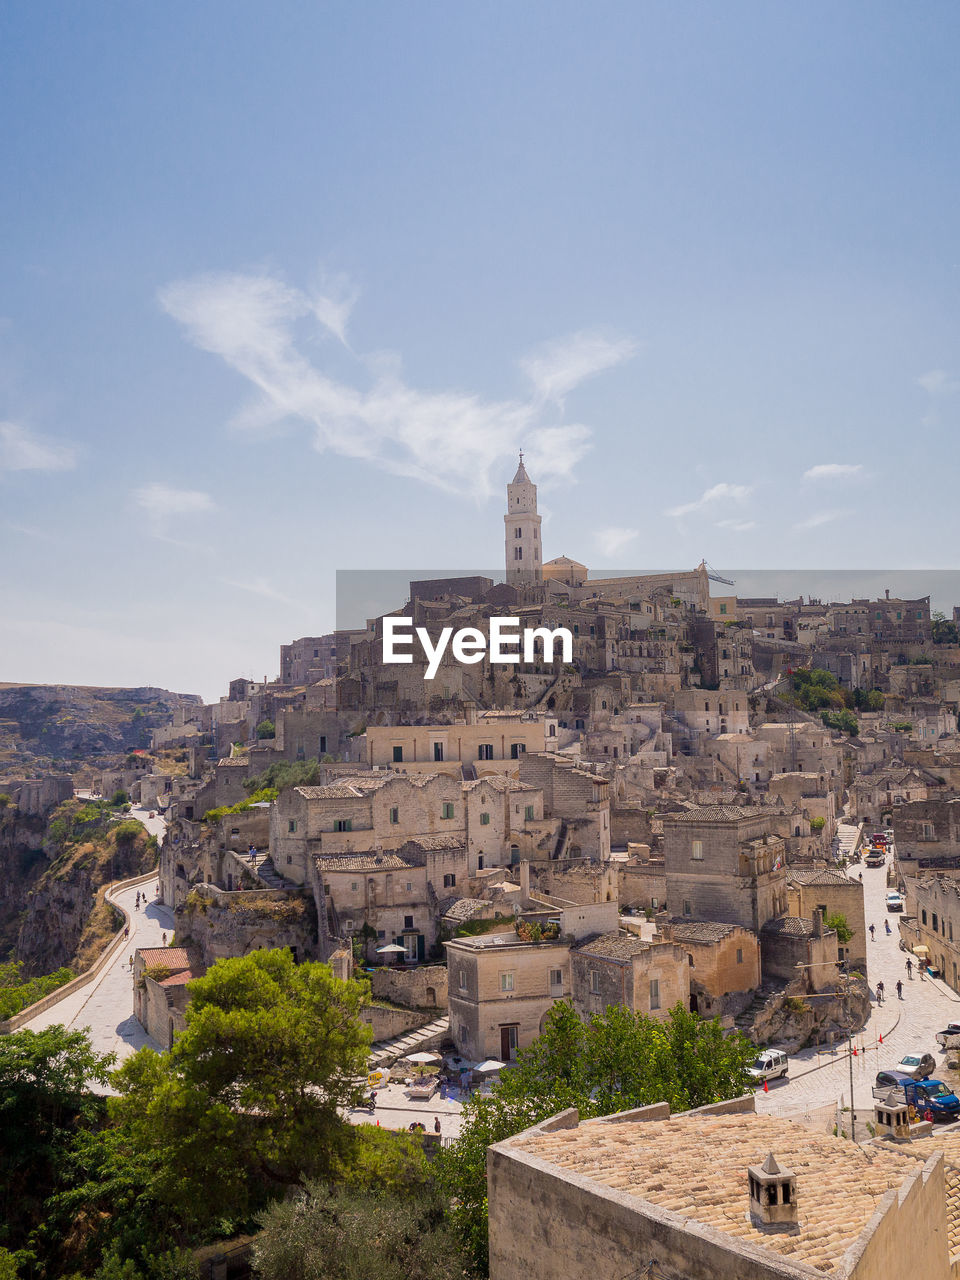 The panorama of the beautiful city of matera, italy.